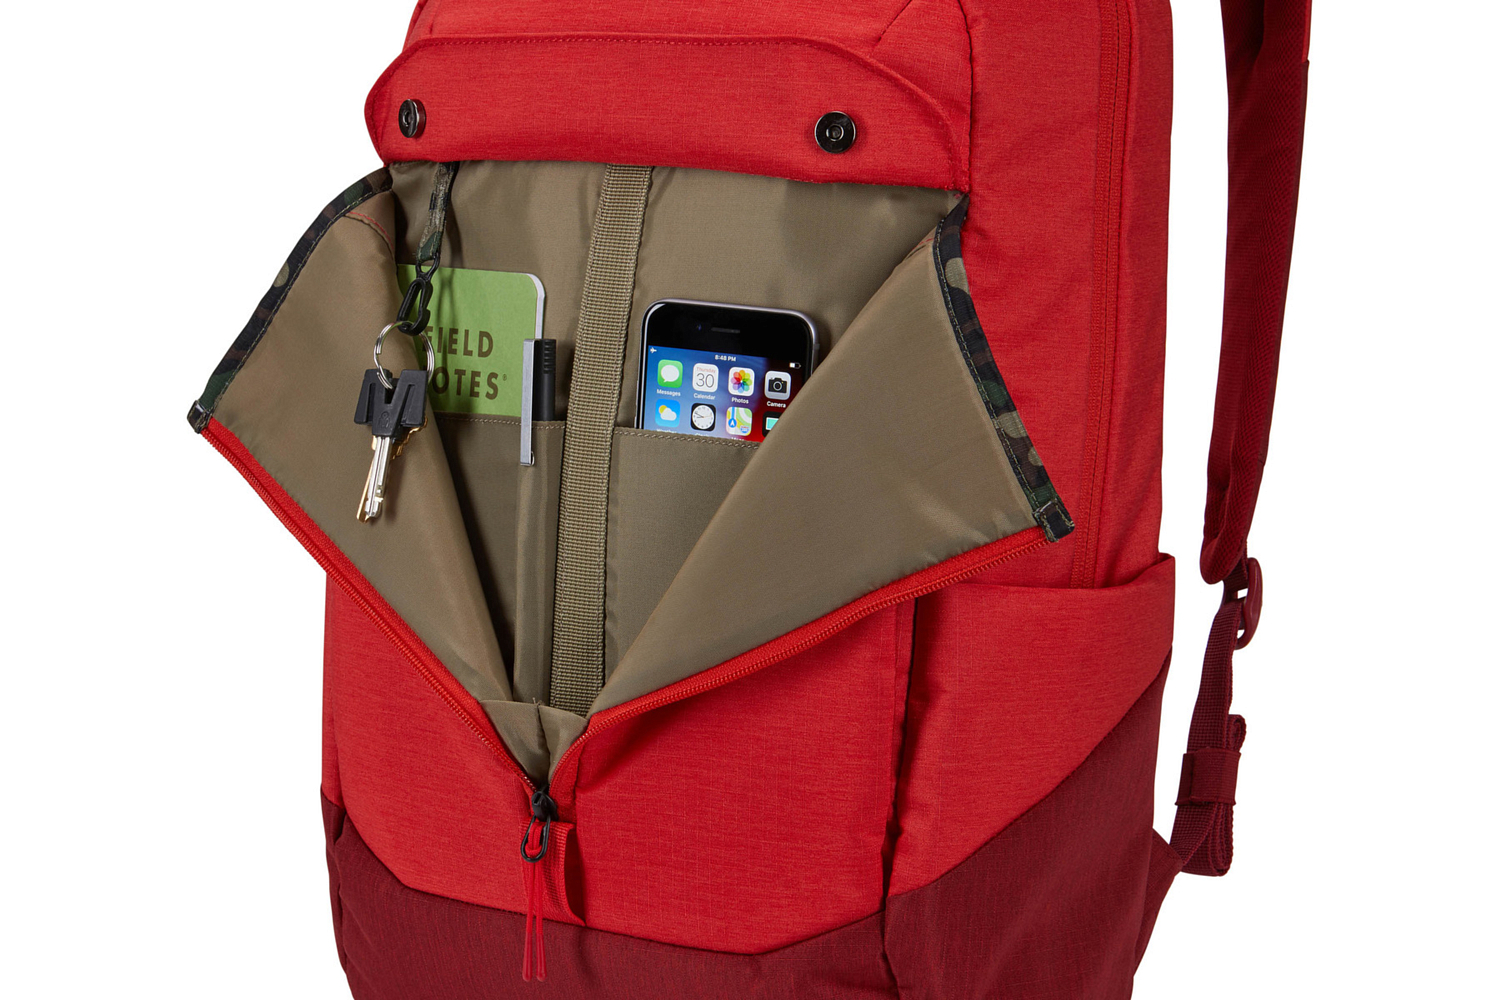 Рюкзак THULE Lithos Backpack 20L Lava/Red Feather